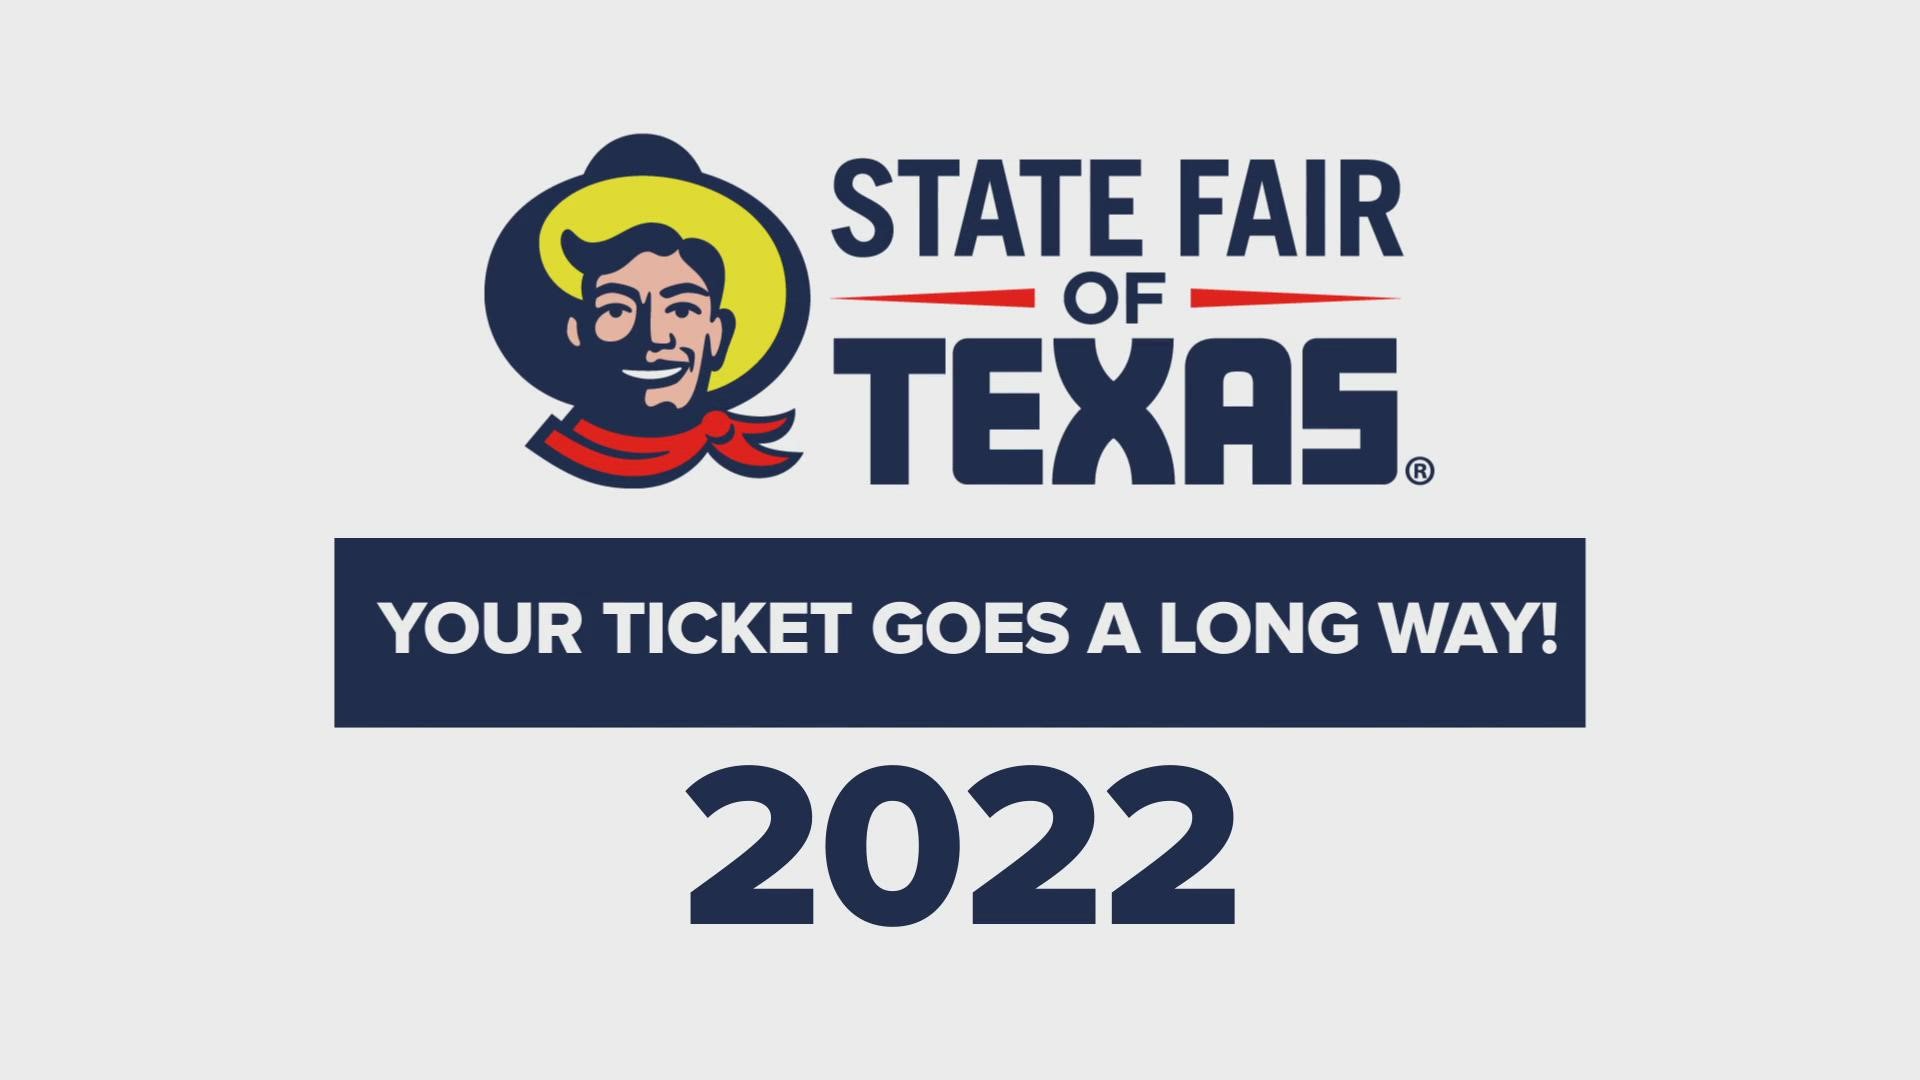 The cost of your ticket to The State Fair of Texas goes a long way.